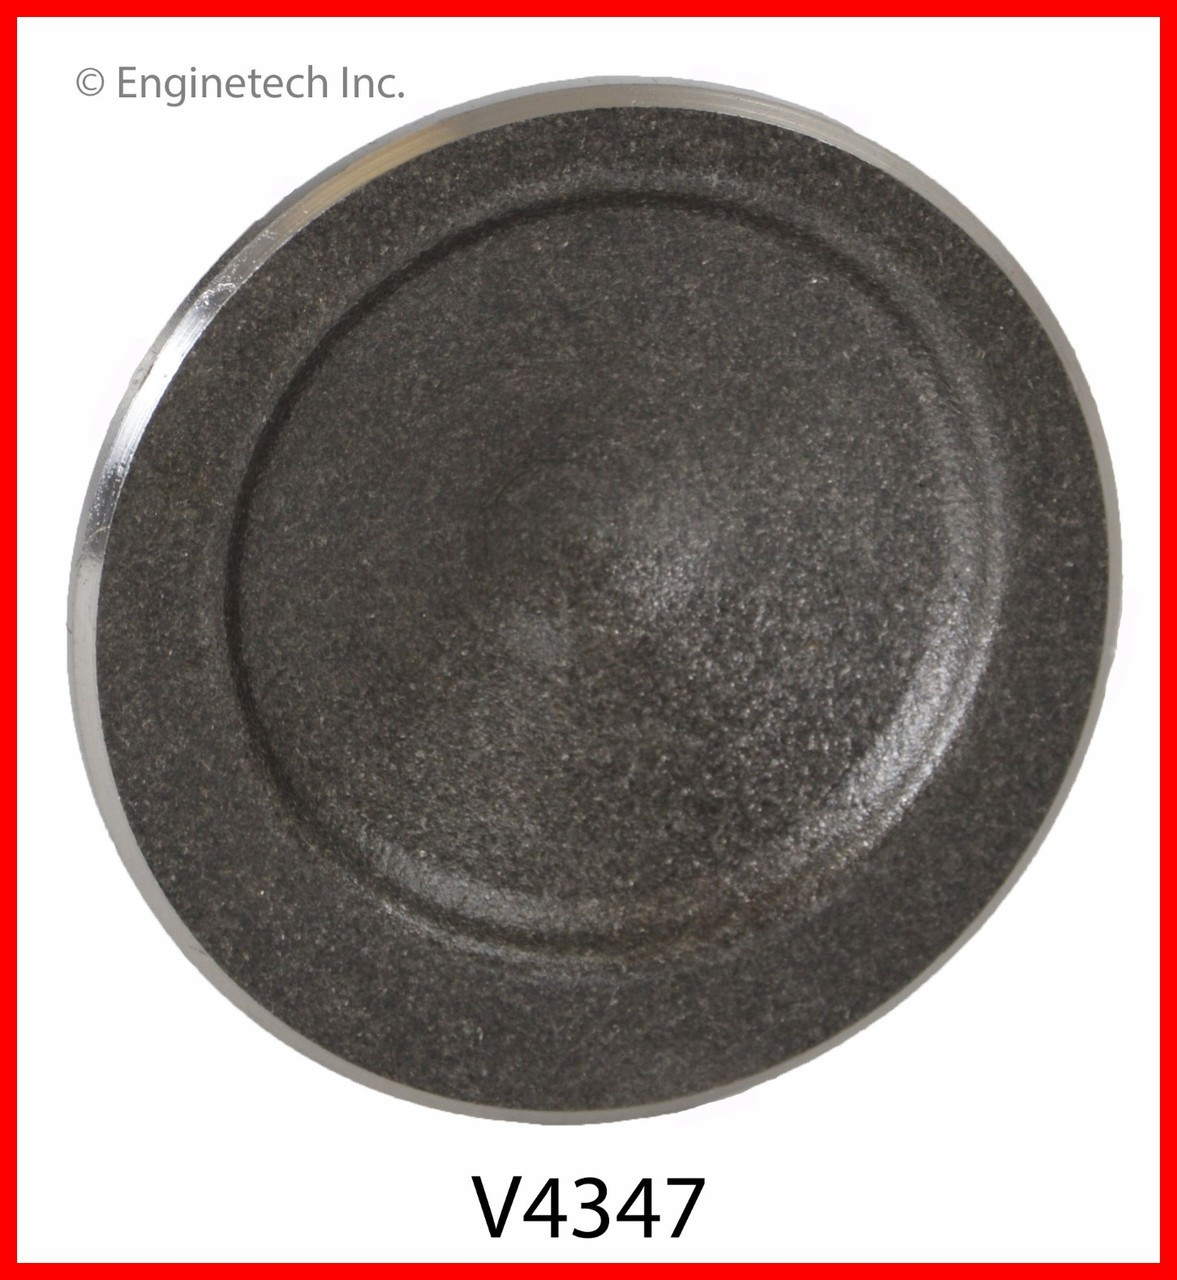 Exhaust Valve - 2001 Chrysler Town & Country 3.3L (V4347.A3)